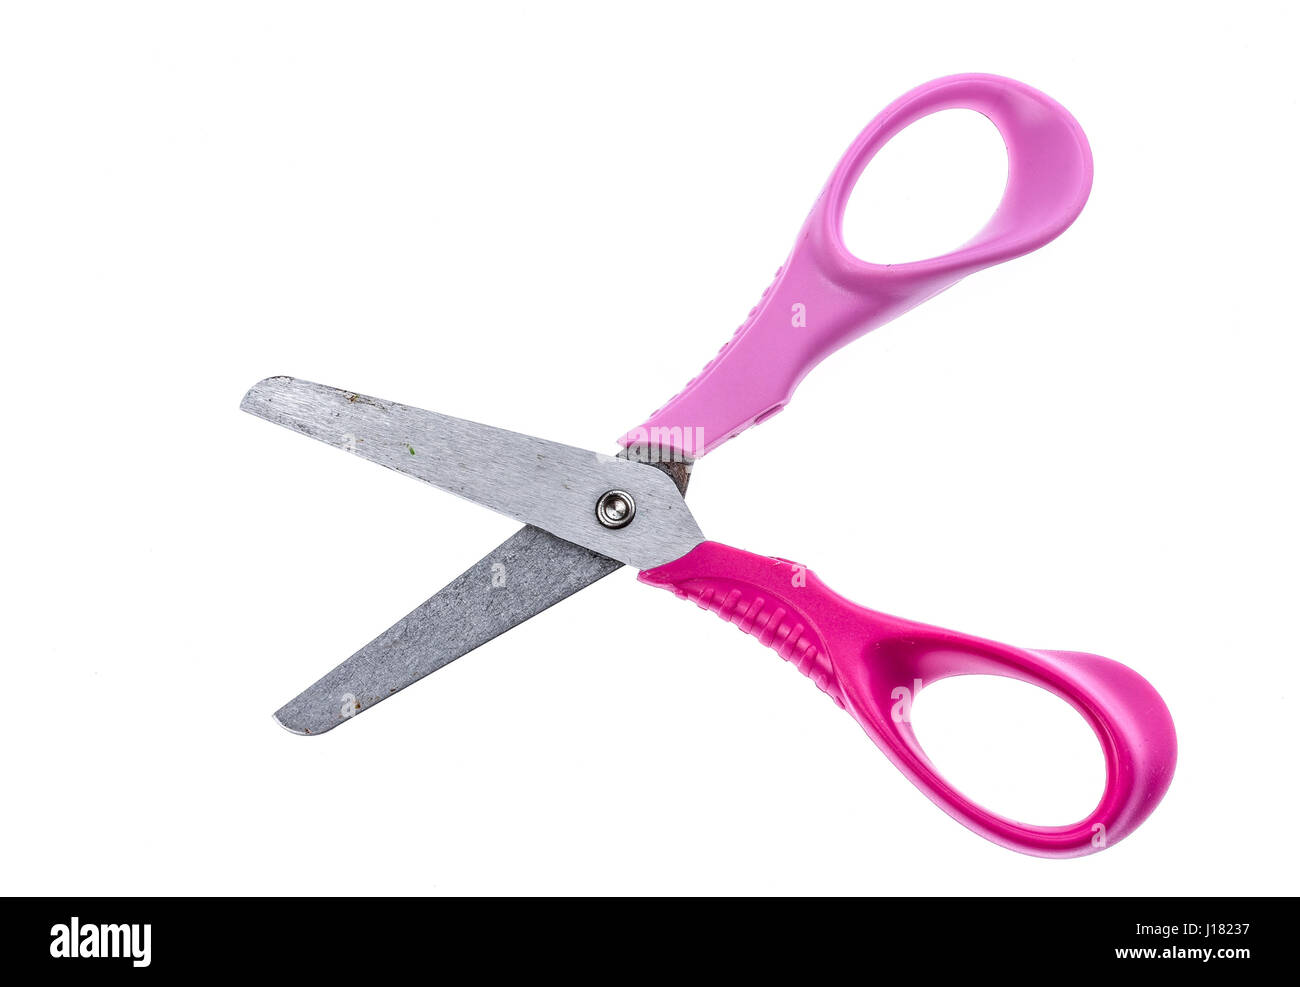 Childrens scissors Cut Out Stock Images & Pictures - Alamy